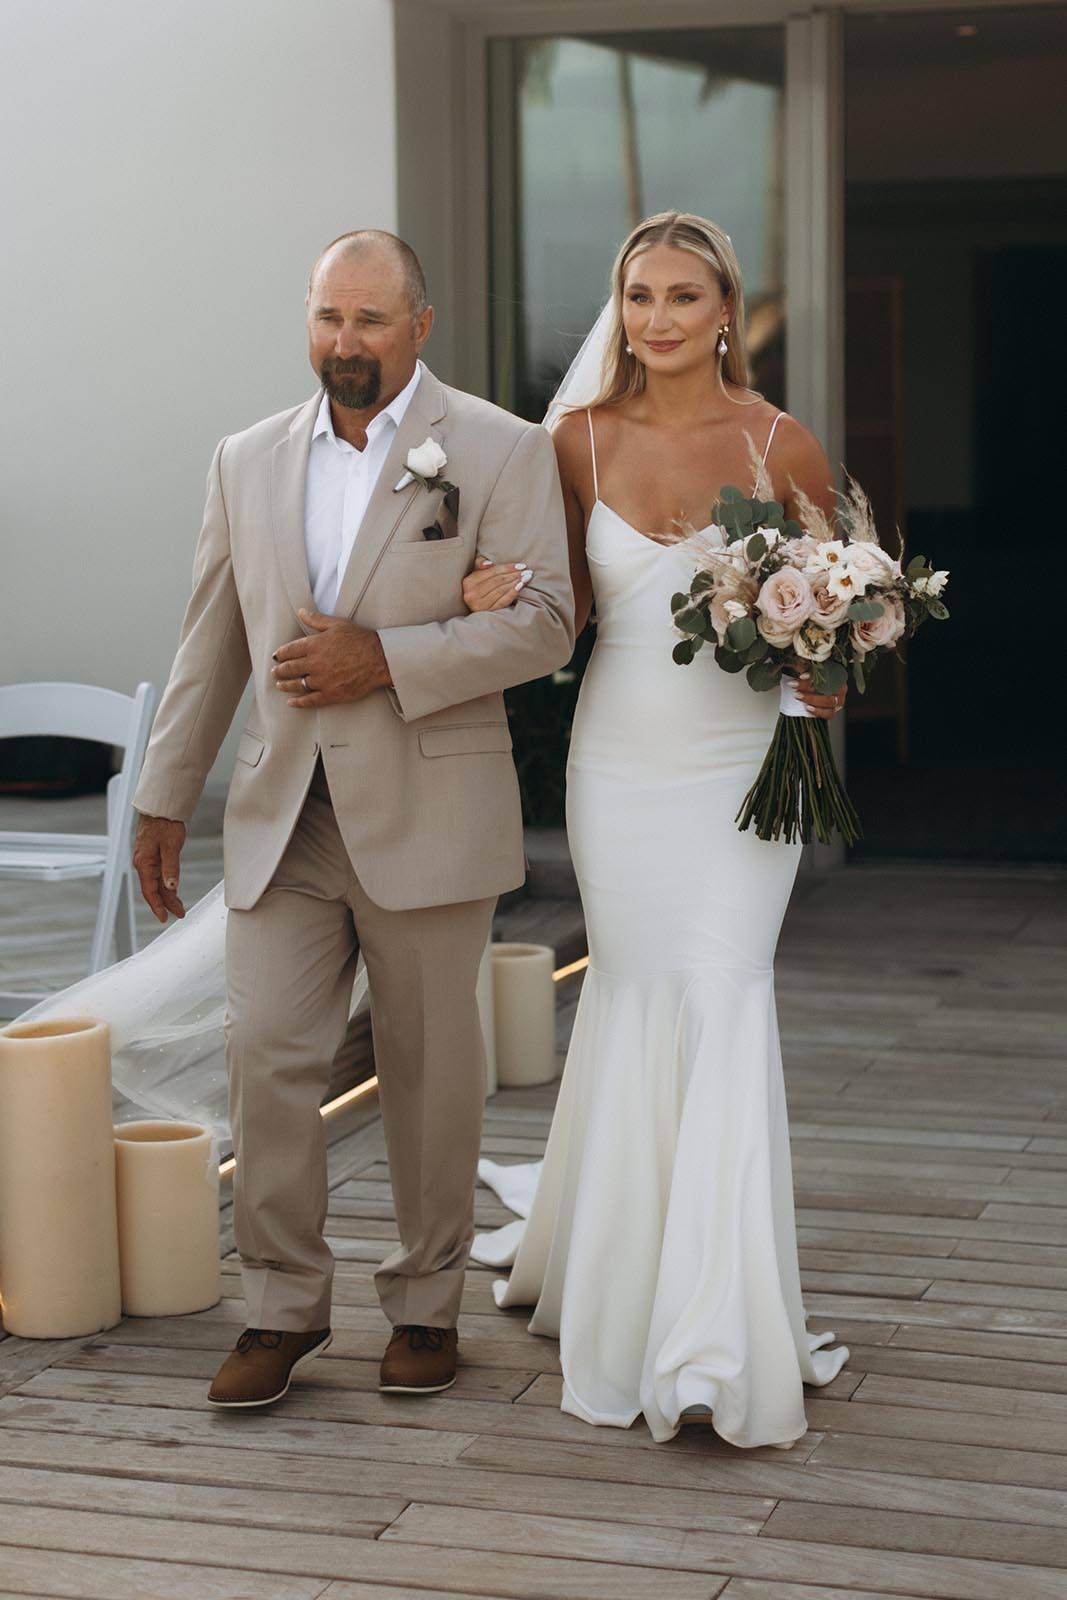 Bride, walking down the aisle with her father